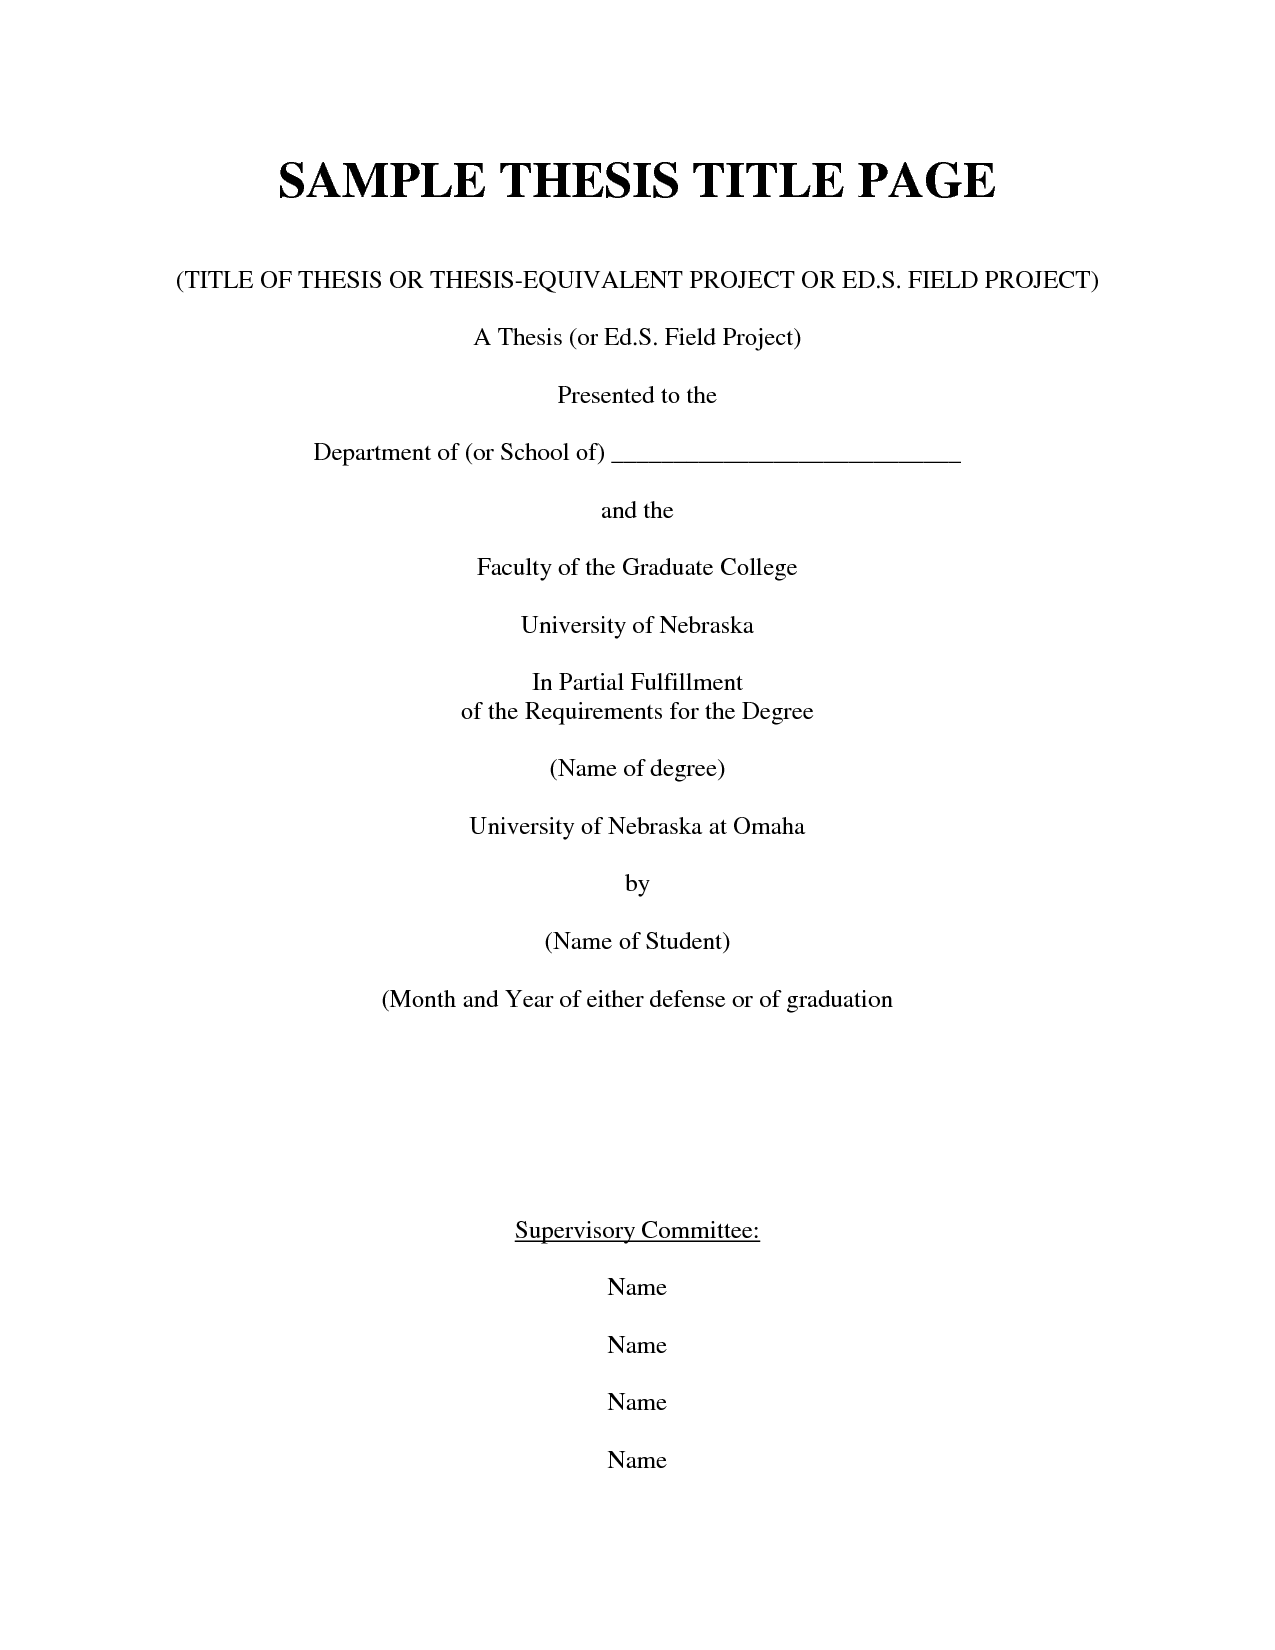 Dissertation thesis in psychology